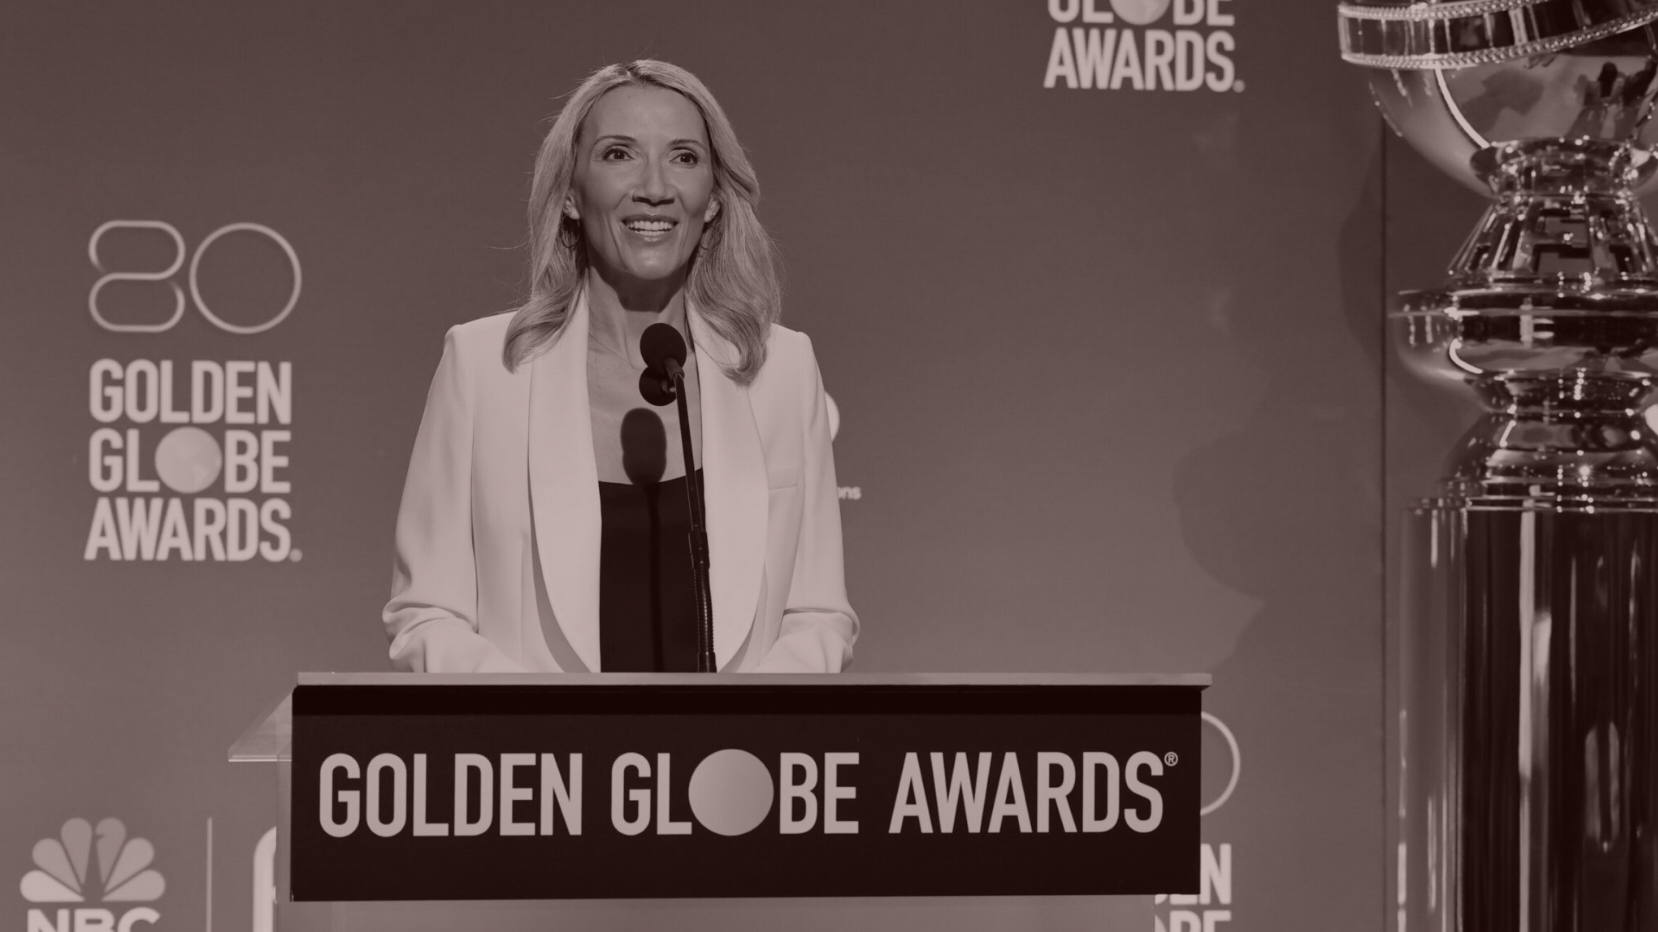 Welcome to the Do-or-Die Golden Globes